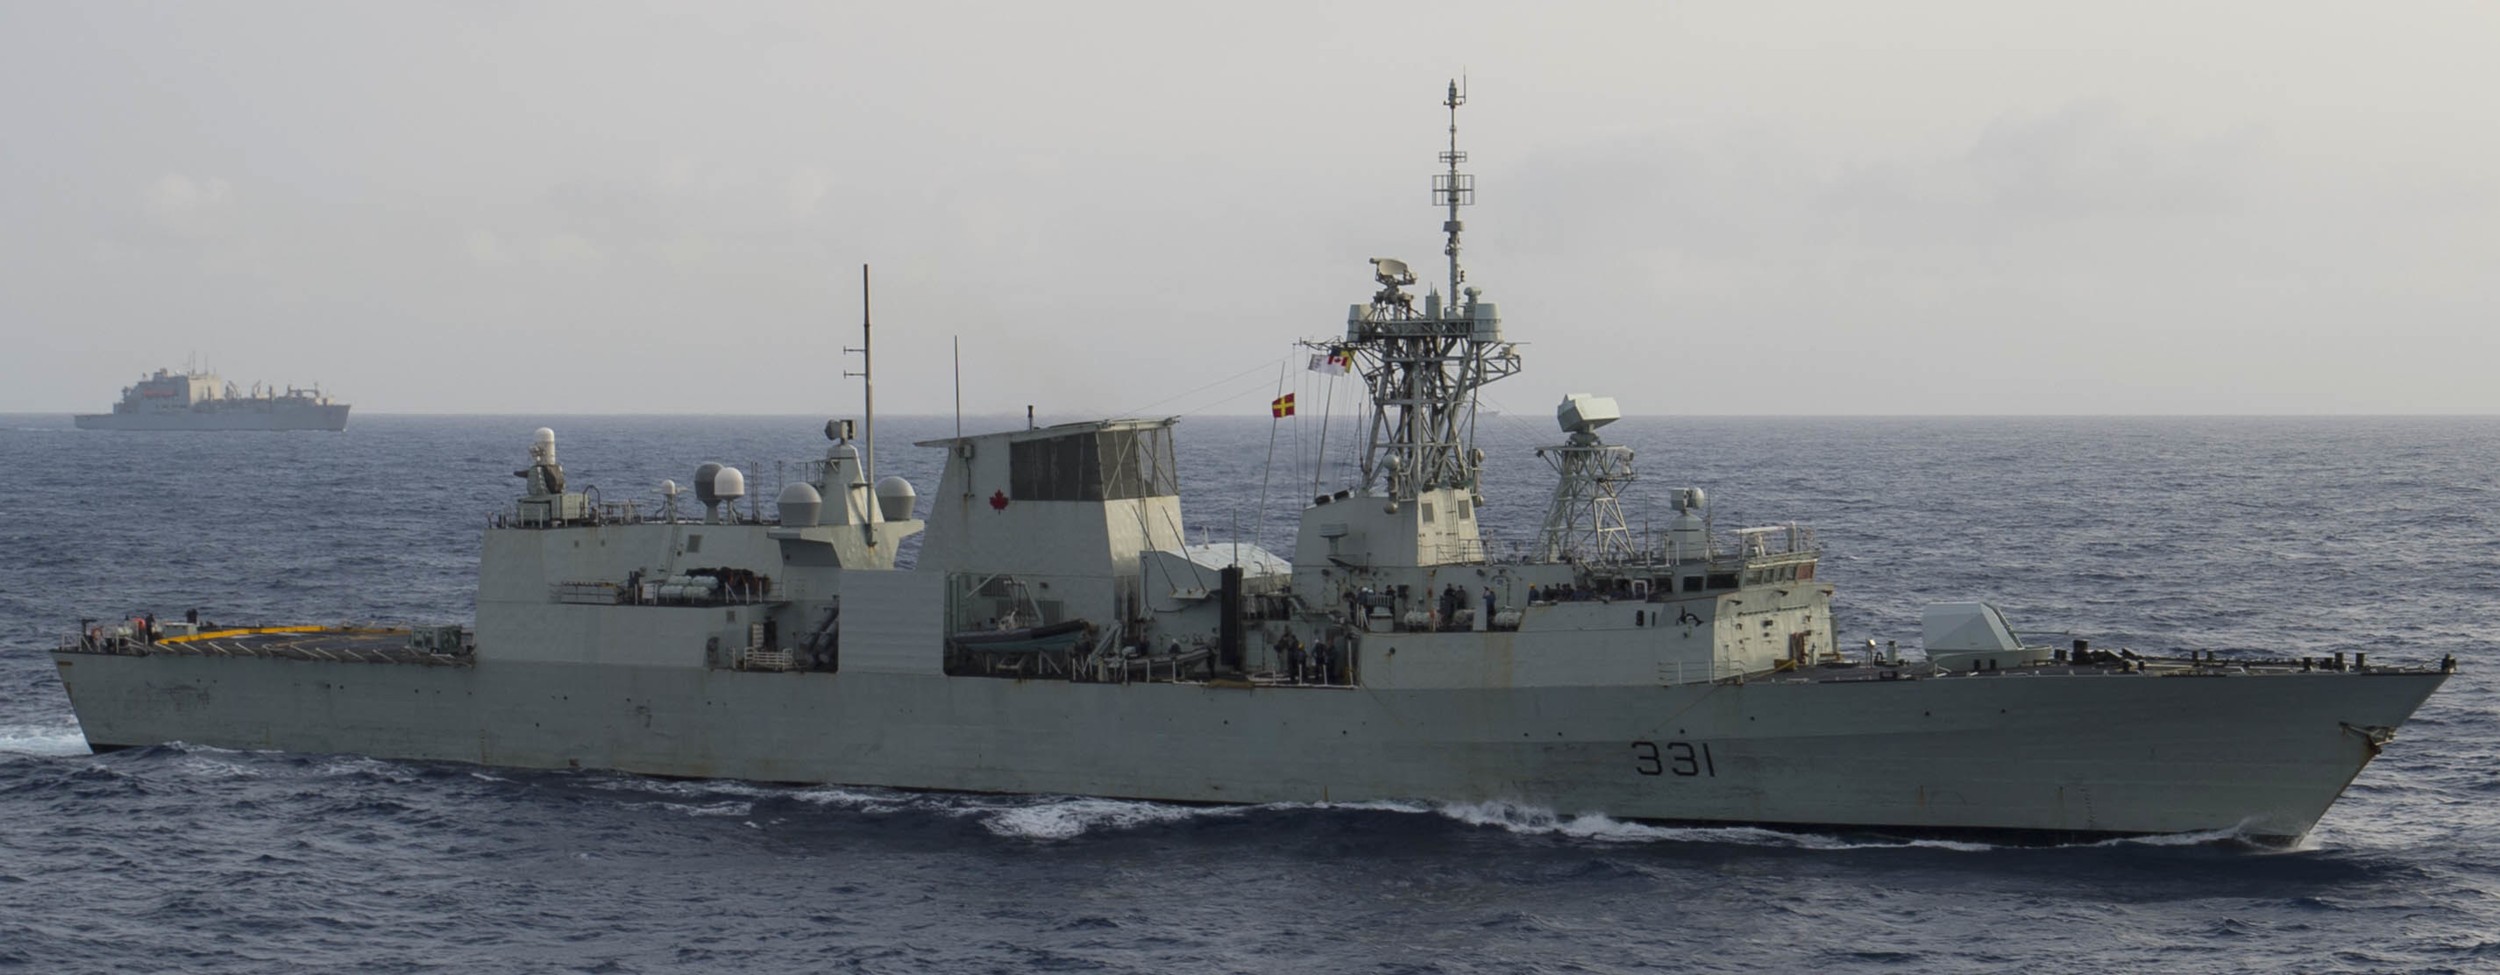 ffh-331 hmcs vancouver halifax class helicopter patrol frigate ncsm royal canadian navy 16